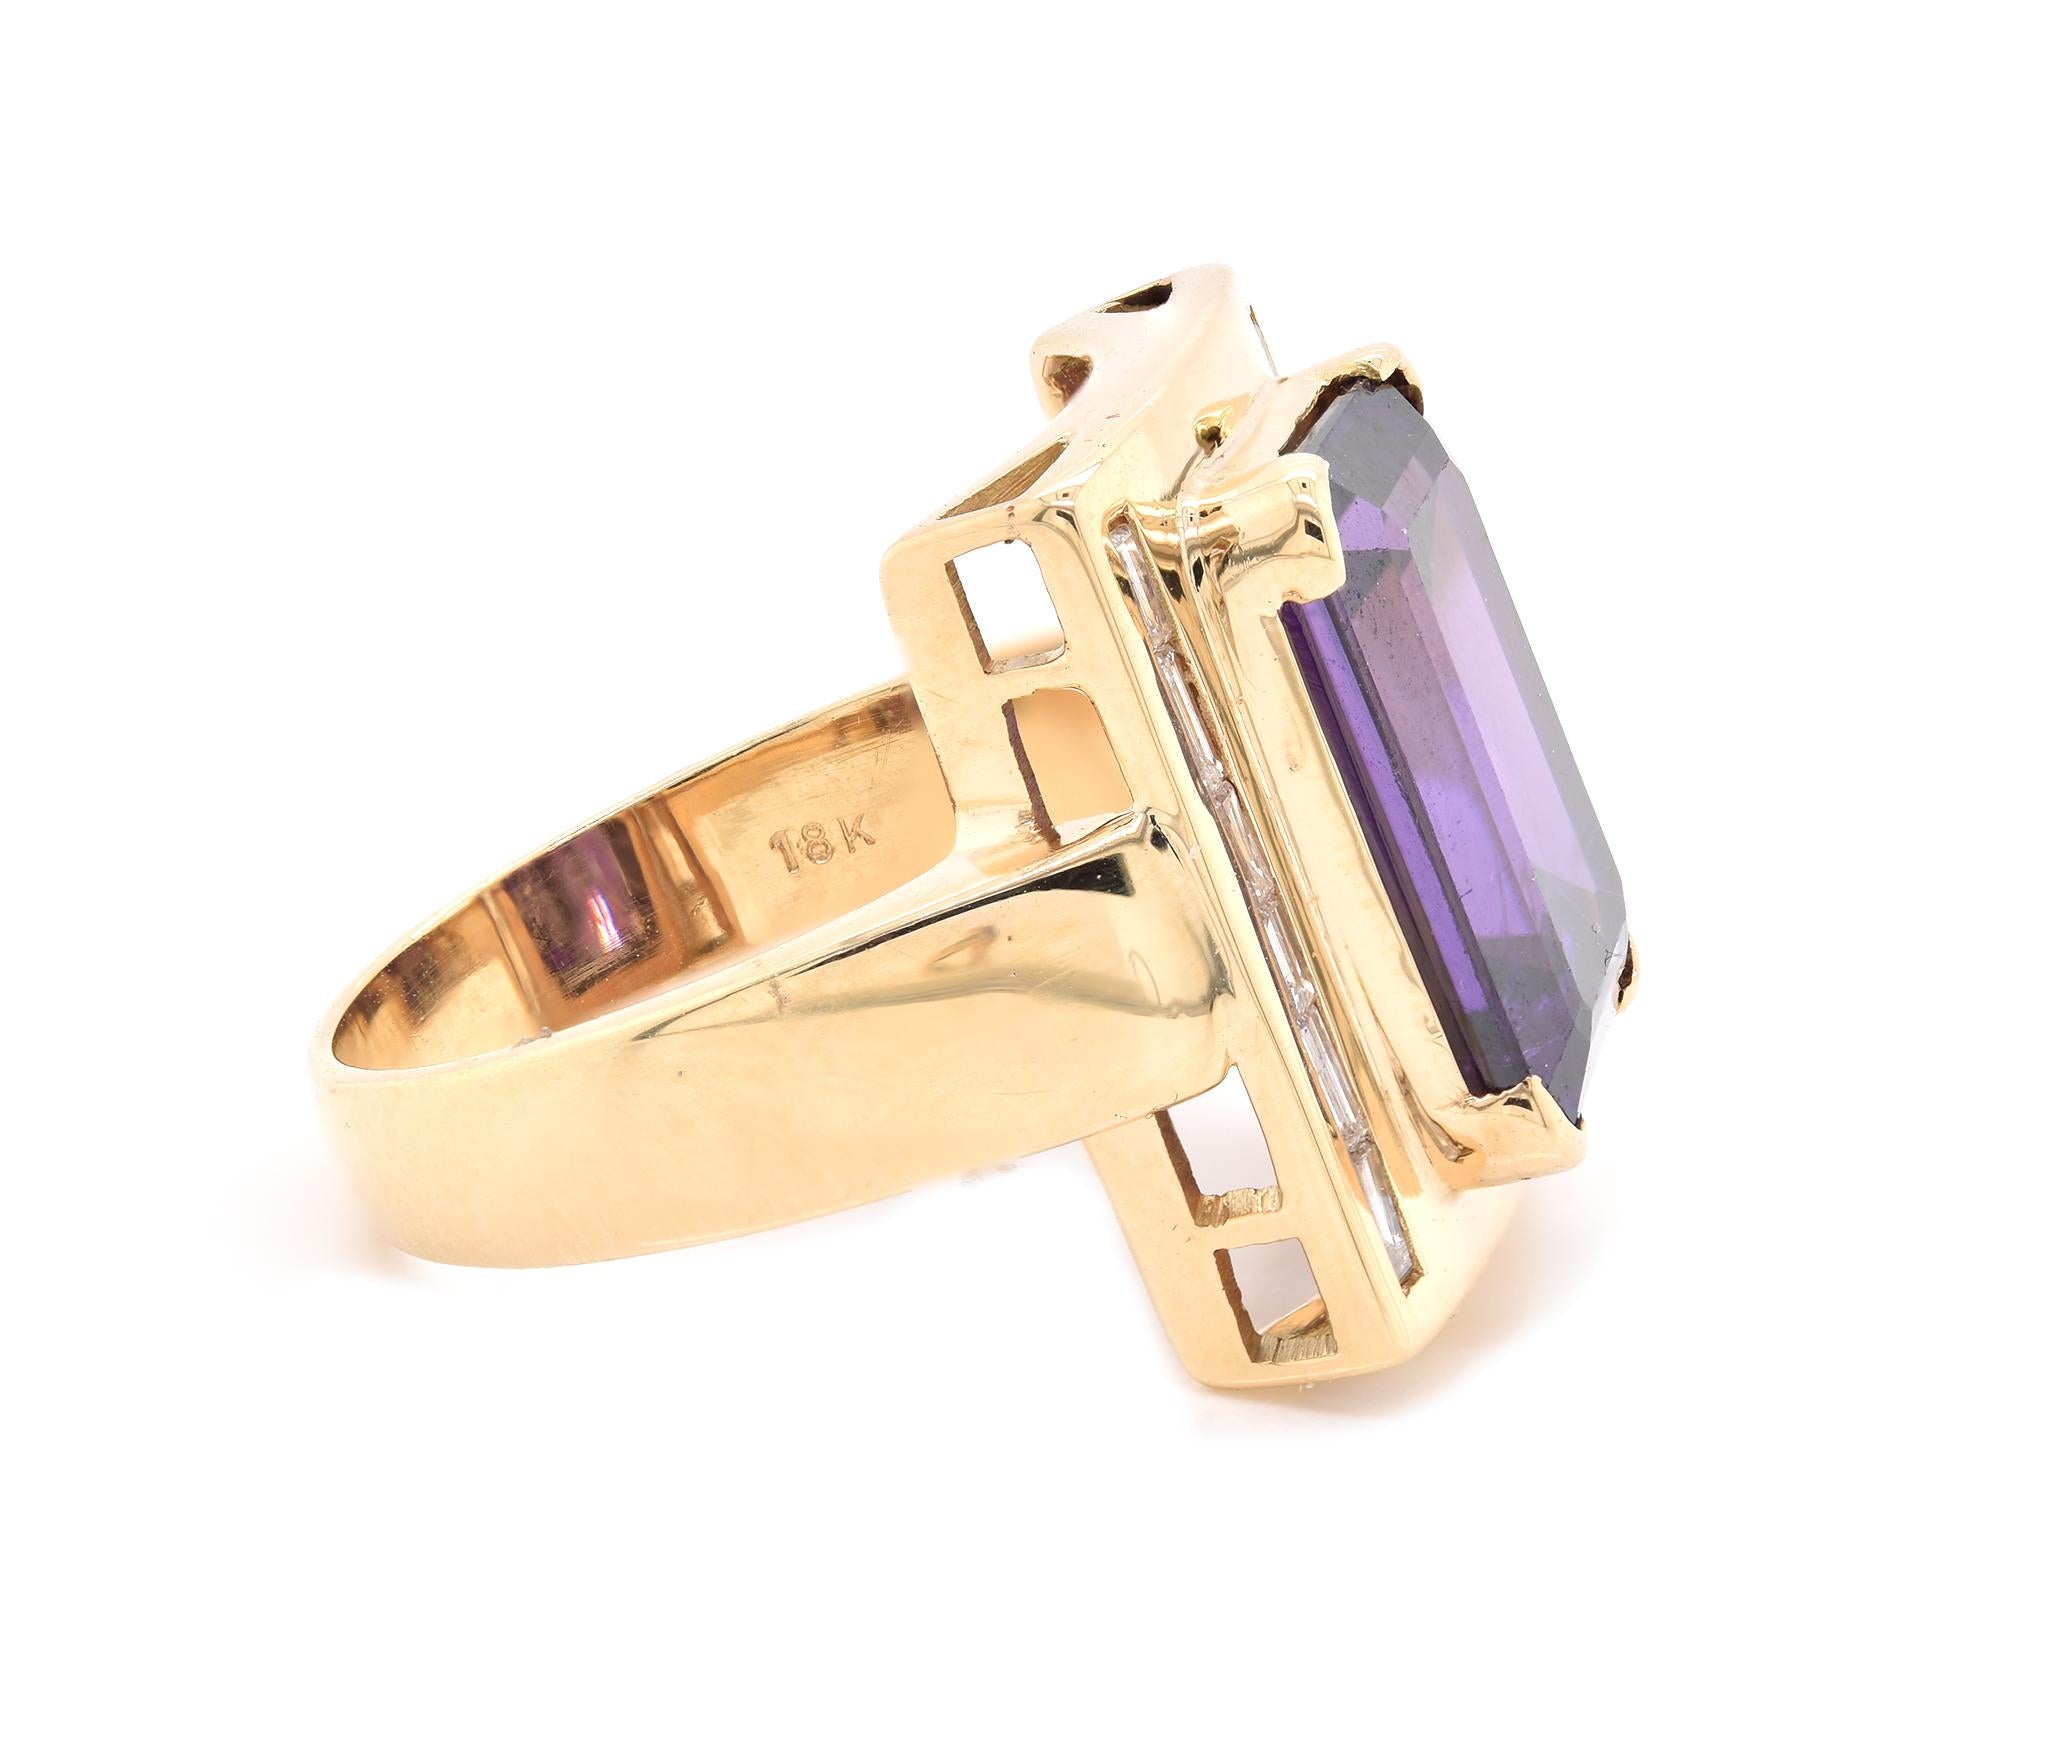 Designer: custom design
Material: 18K yellow gold
Diamonds: 12 baguette cut = .24cttw
Color: G
Clarity: SI1
Amethyst: 1 emerald cut = 6.89ct
Dimensions: ring top measures 18.45mm wide
Ring Size: 8.5 (please allow two extra shipping days for sizing